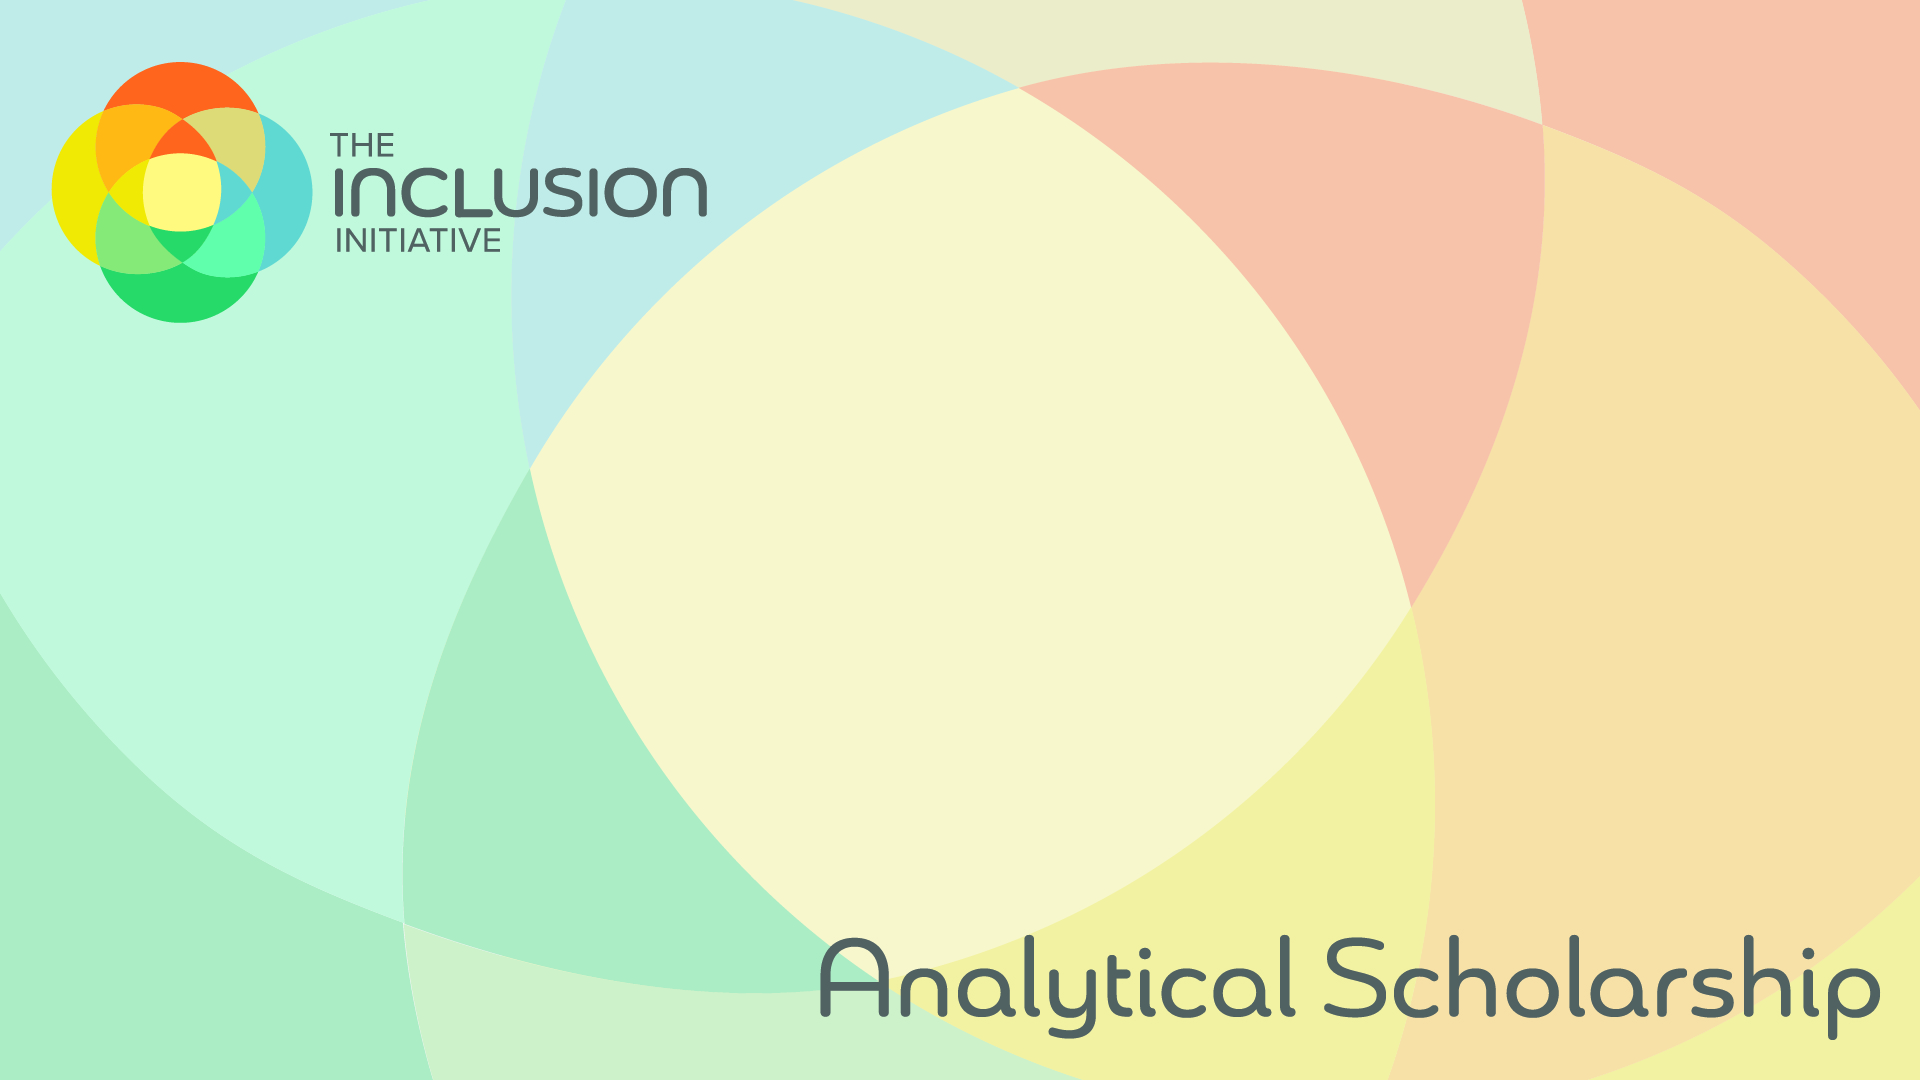 Inclusion Initiative Logo and Analytical Scholarship